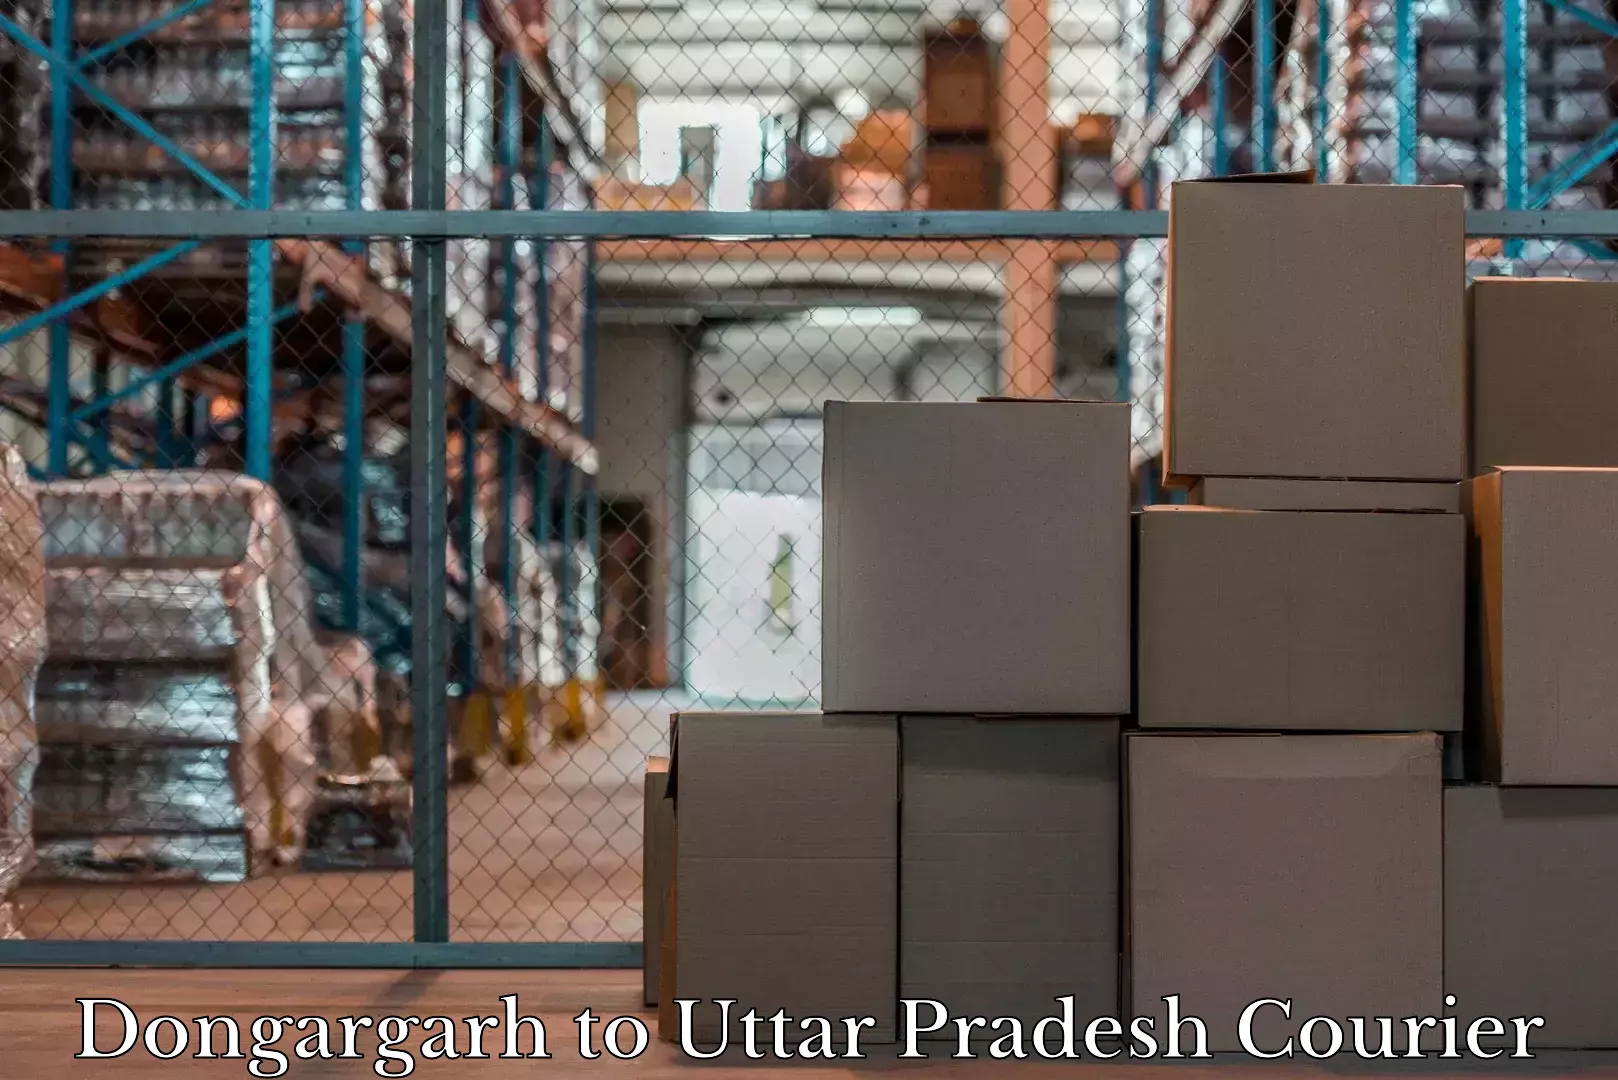 Baggage shipping service in Dongargarh to Bijnor